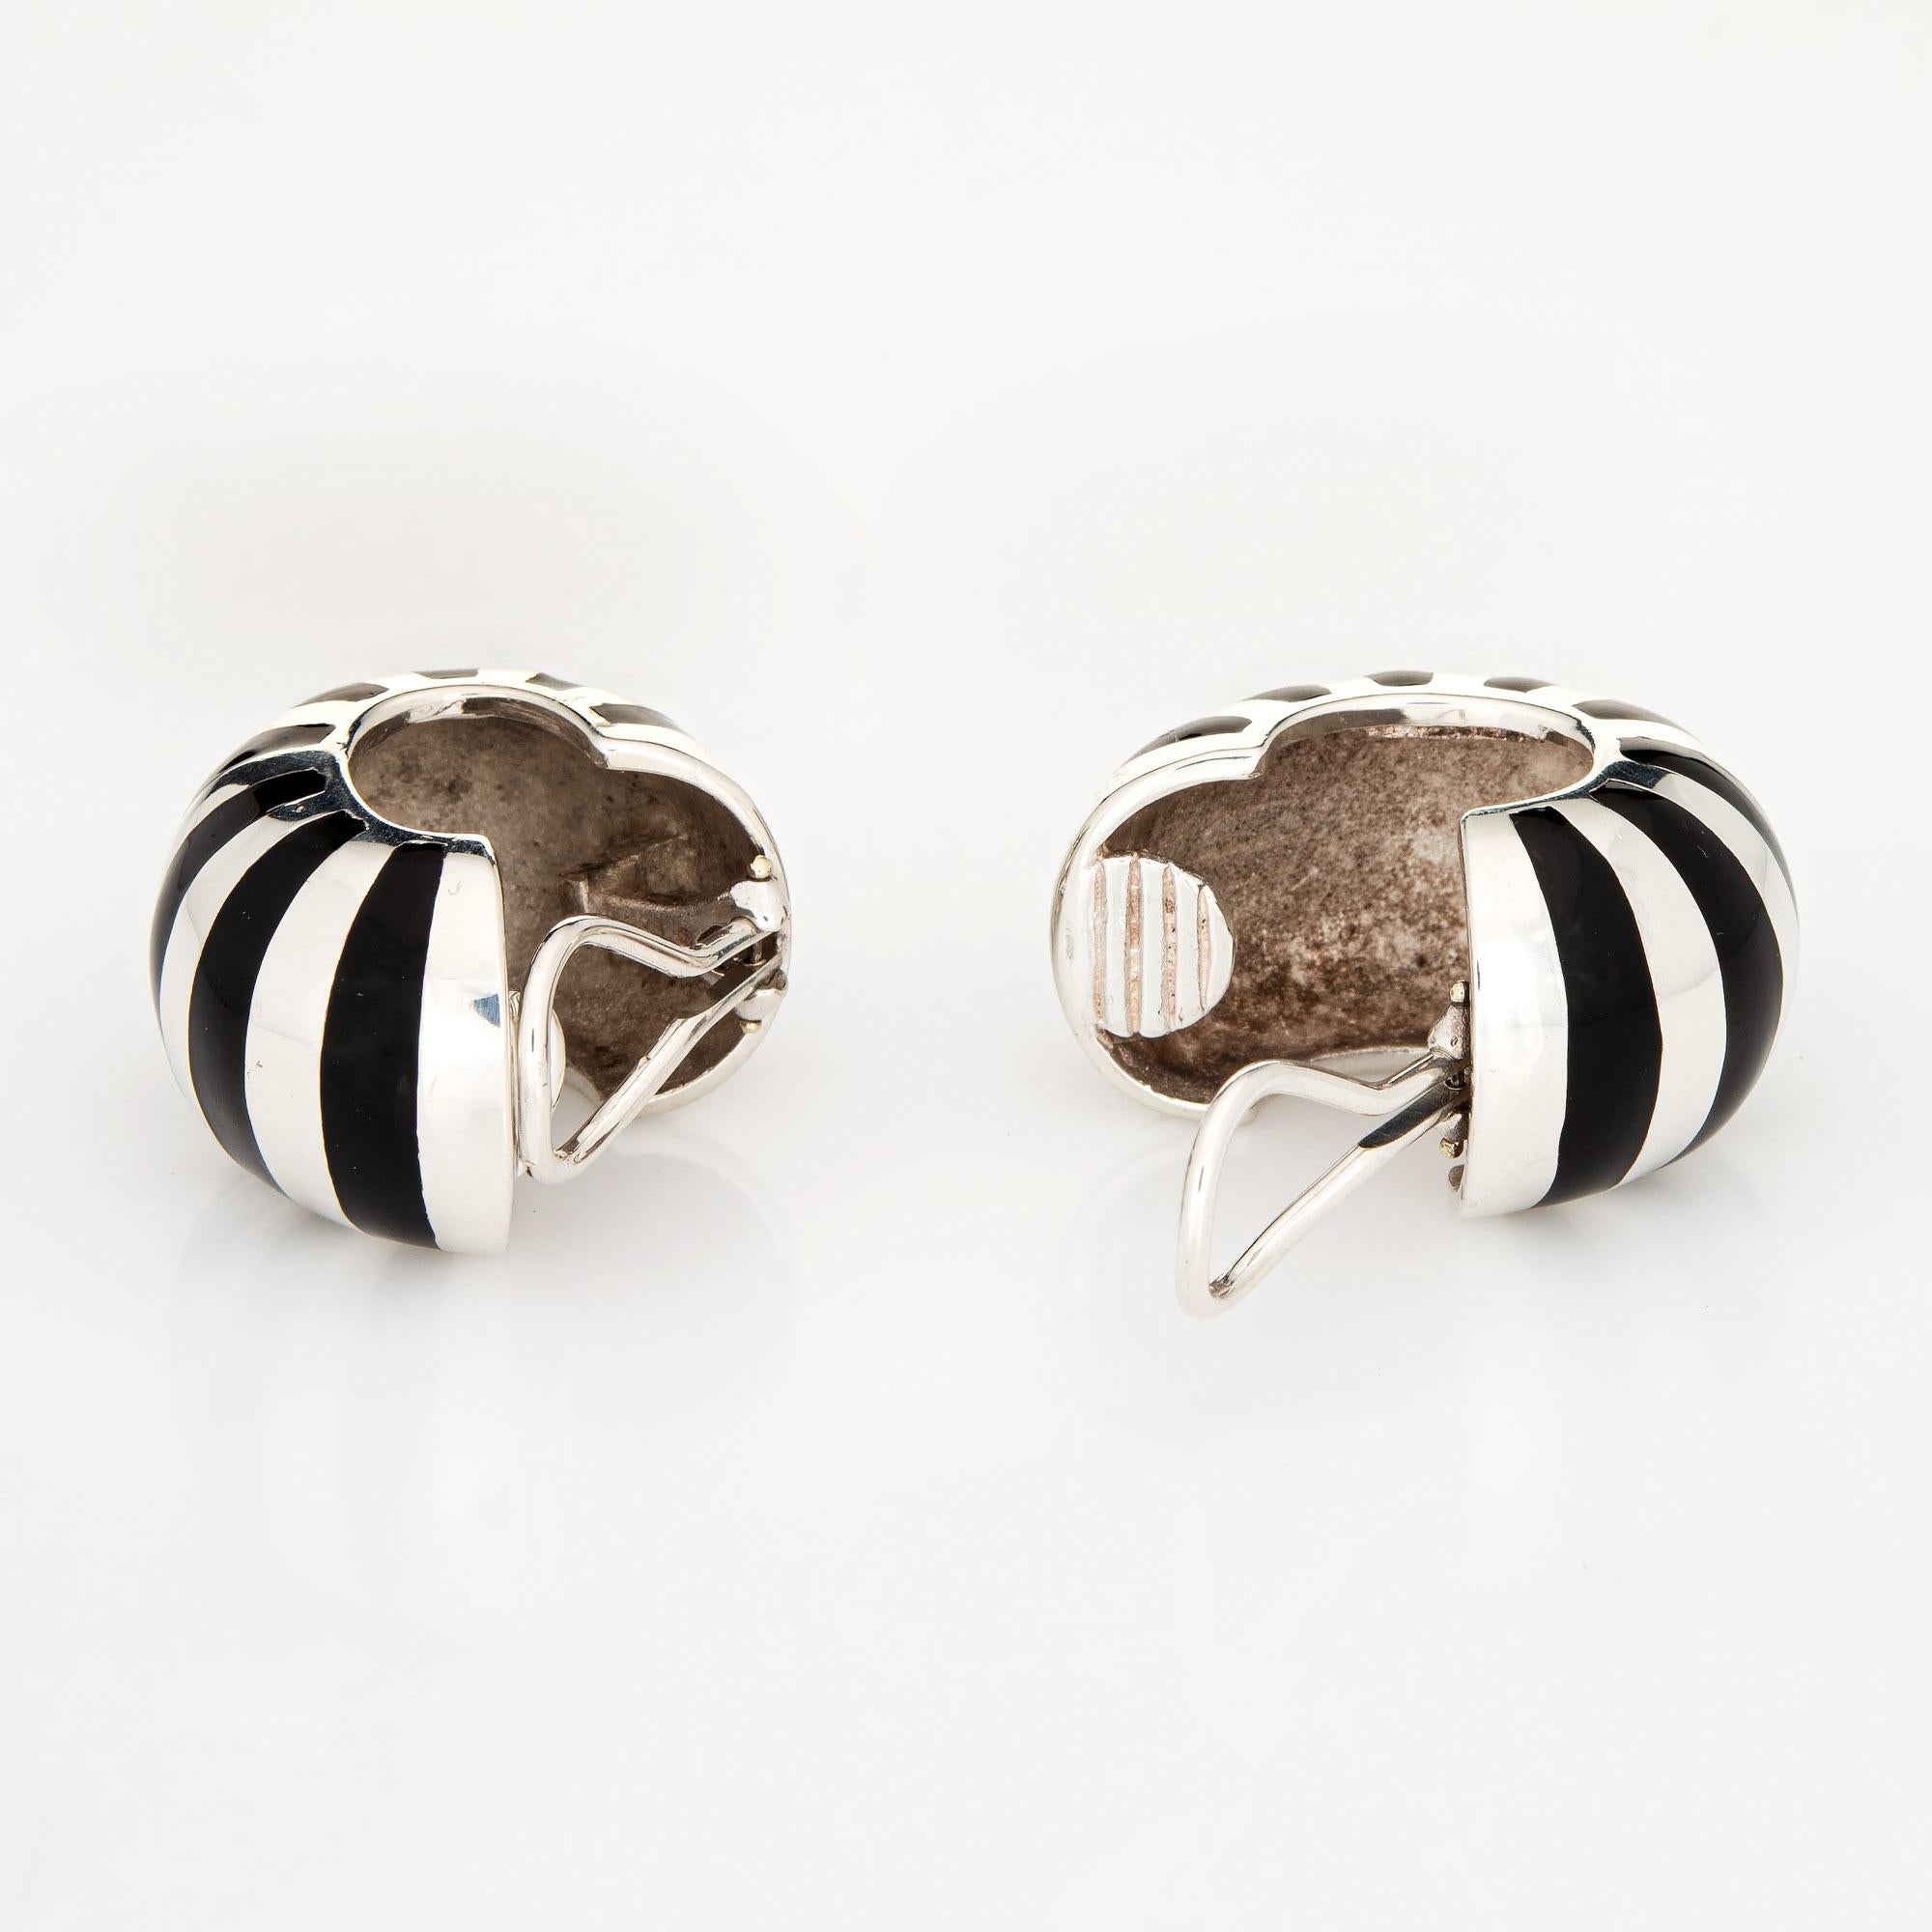 Elegant pair of vintage Tiffany & Co earrings (circa 1980s) crafted in sterling silver. 

The vintage 1980s earrings feature a black enamel stripe design. A great collector piece today (and also a very wearable pair of earrings!) The earrings are